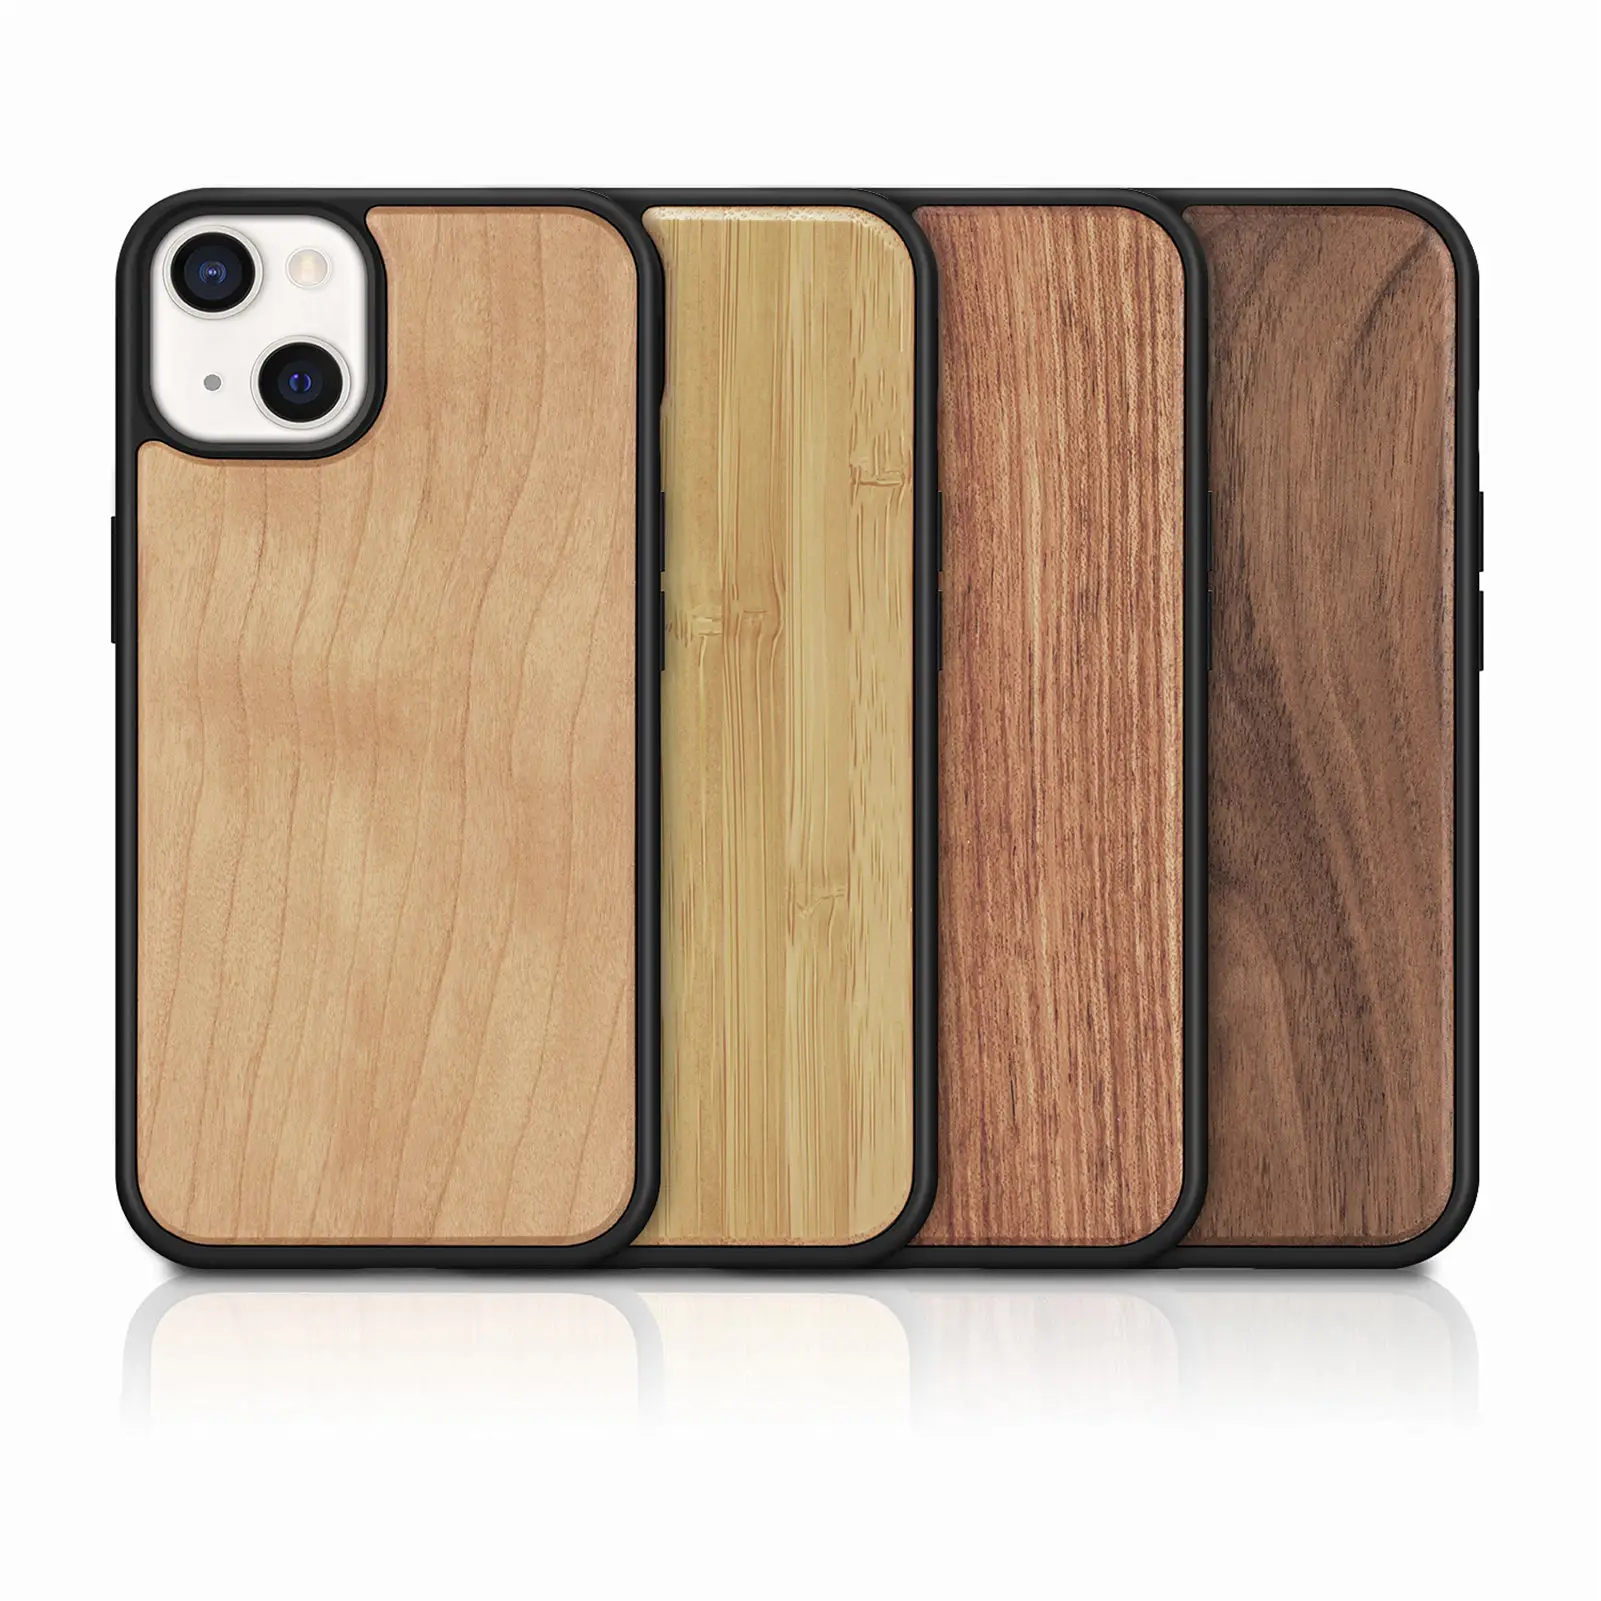 

Real Wood Wooden Friendly Hard Handphone Mobilephone Wood Cover Phone Case Shell For iPhone 13 mini 13 Pro Max Mobile Phone Case